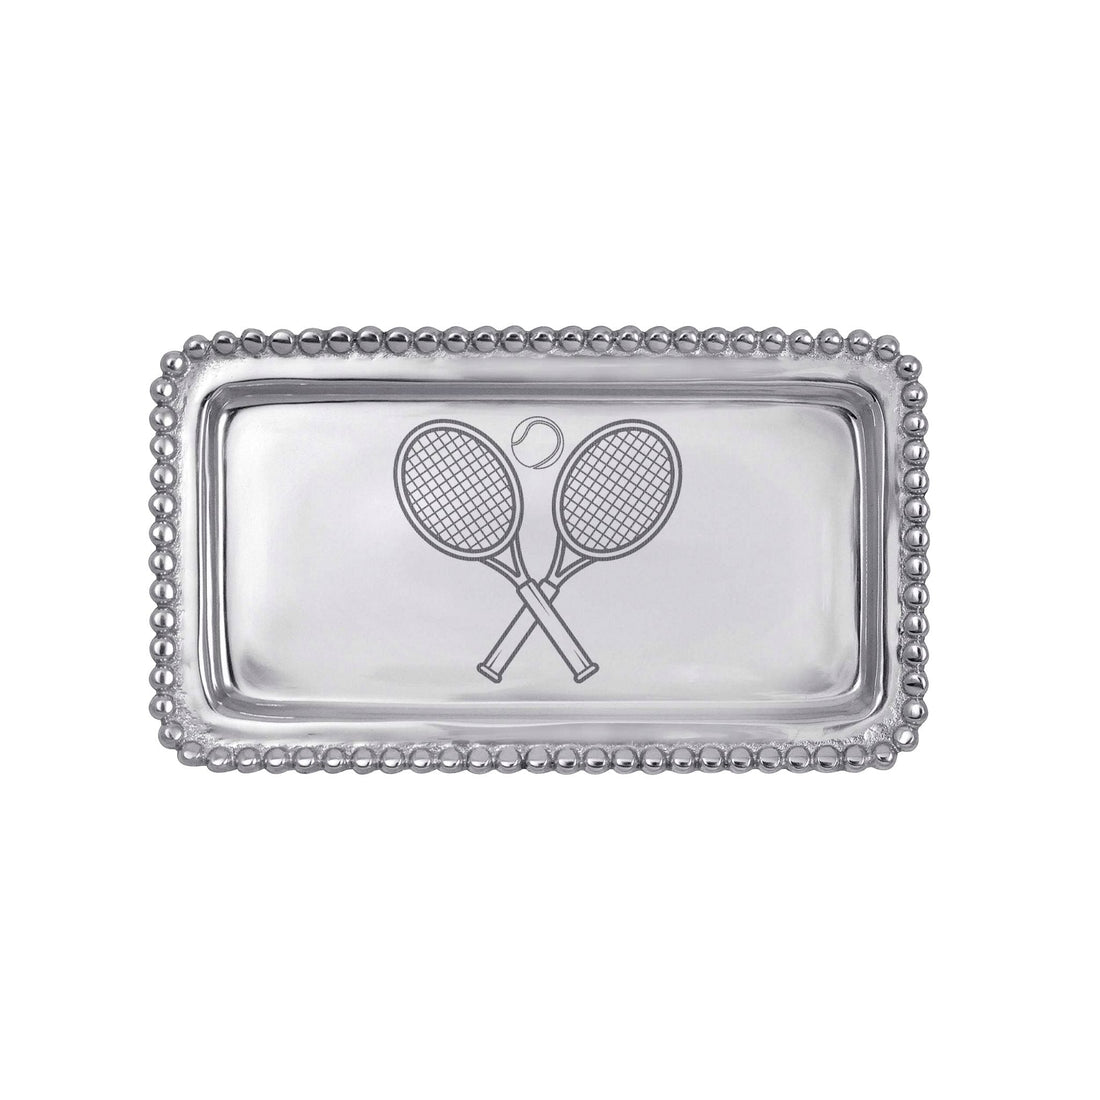 Tennis Racquets Beaded Statement Tray